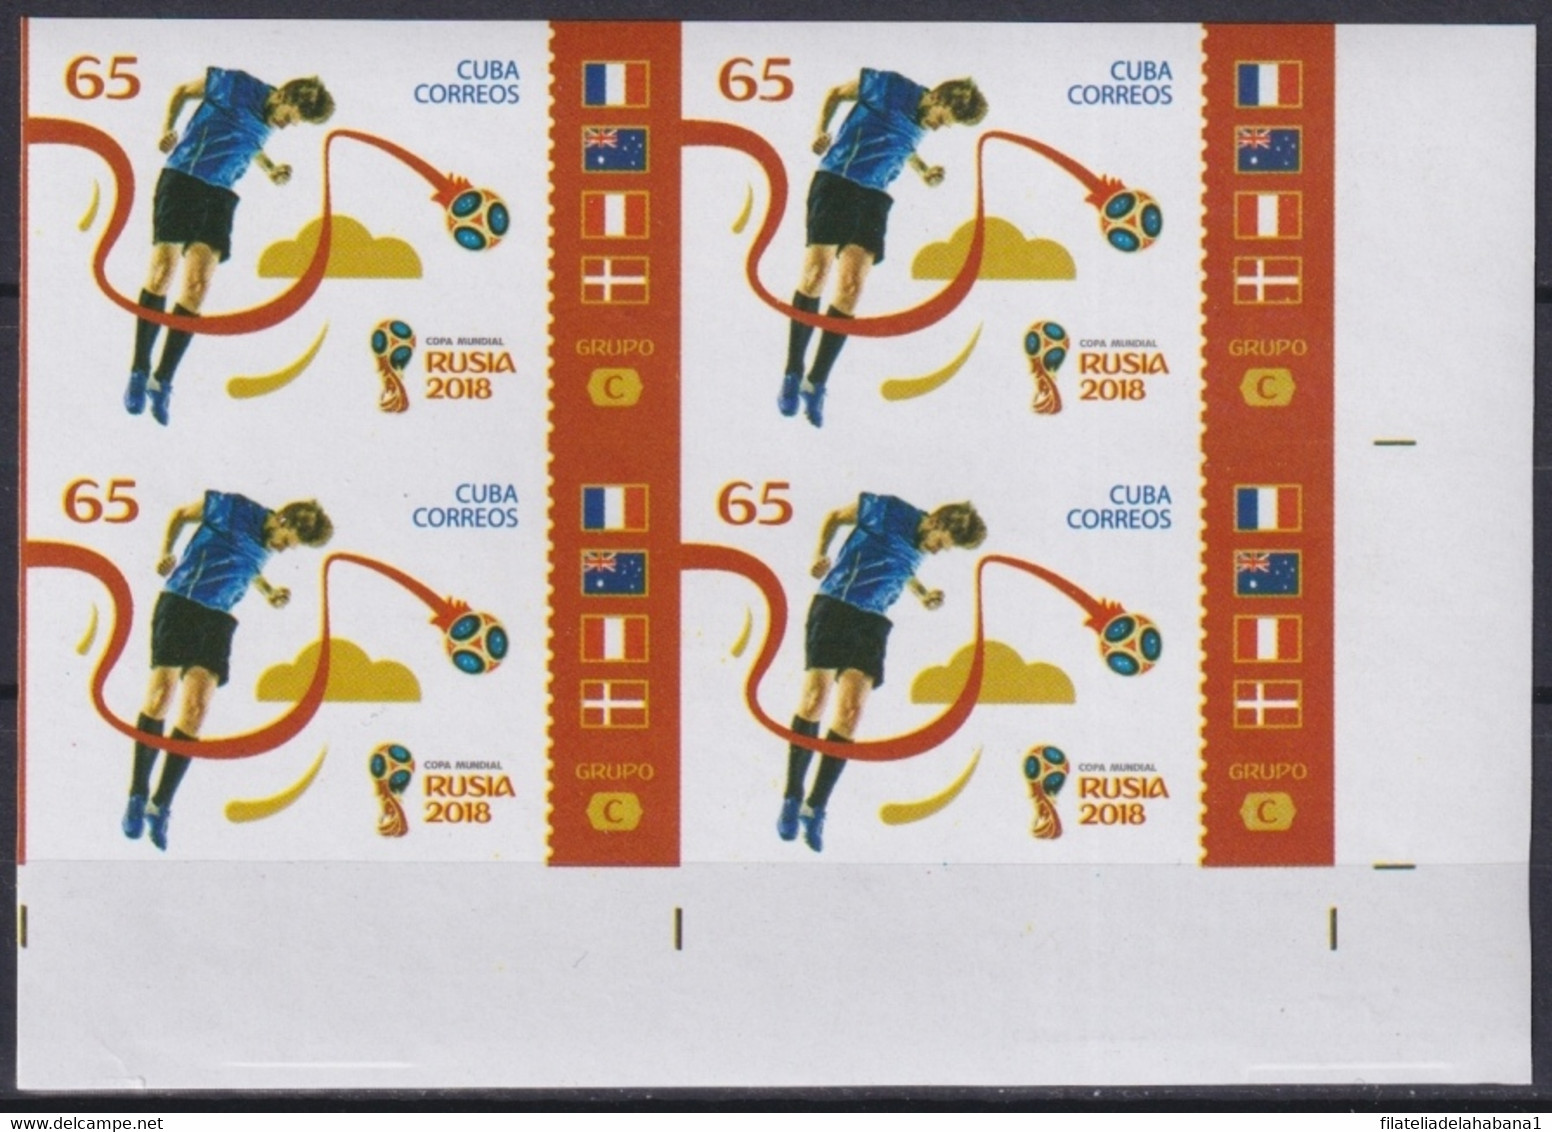 2018.217 CUBA MNH 2018 IMPERFORATED PROOF 65c RUSSIA WORLD SOCCER CHAMPIONSHIP. - Imperforates, Proofs & Errors